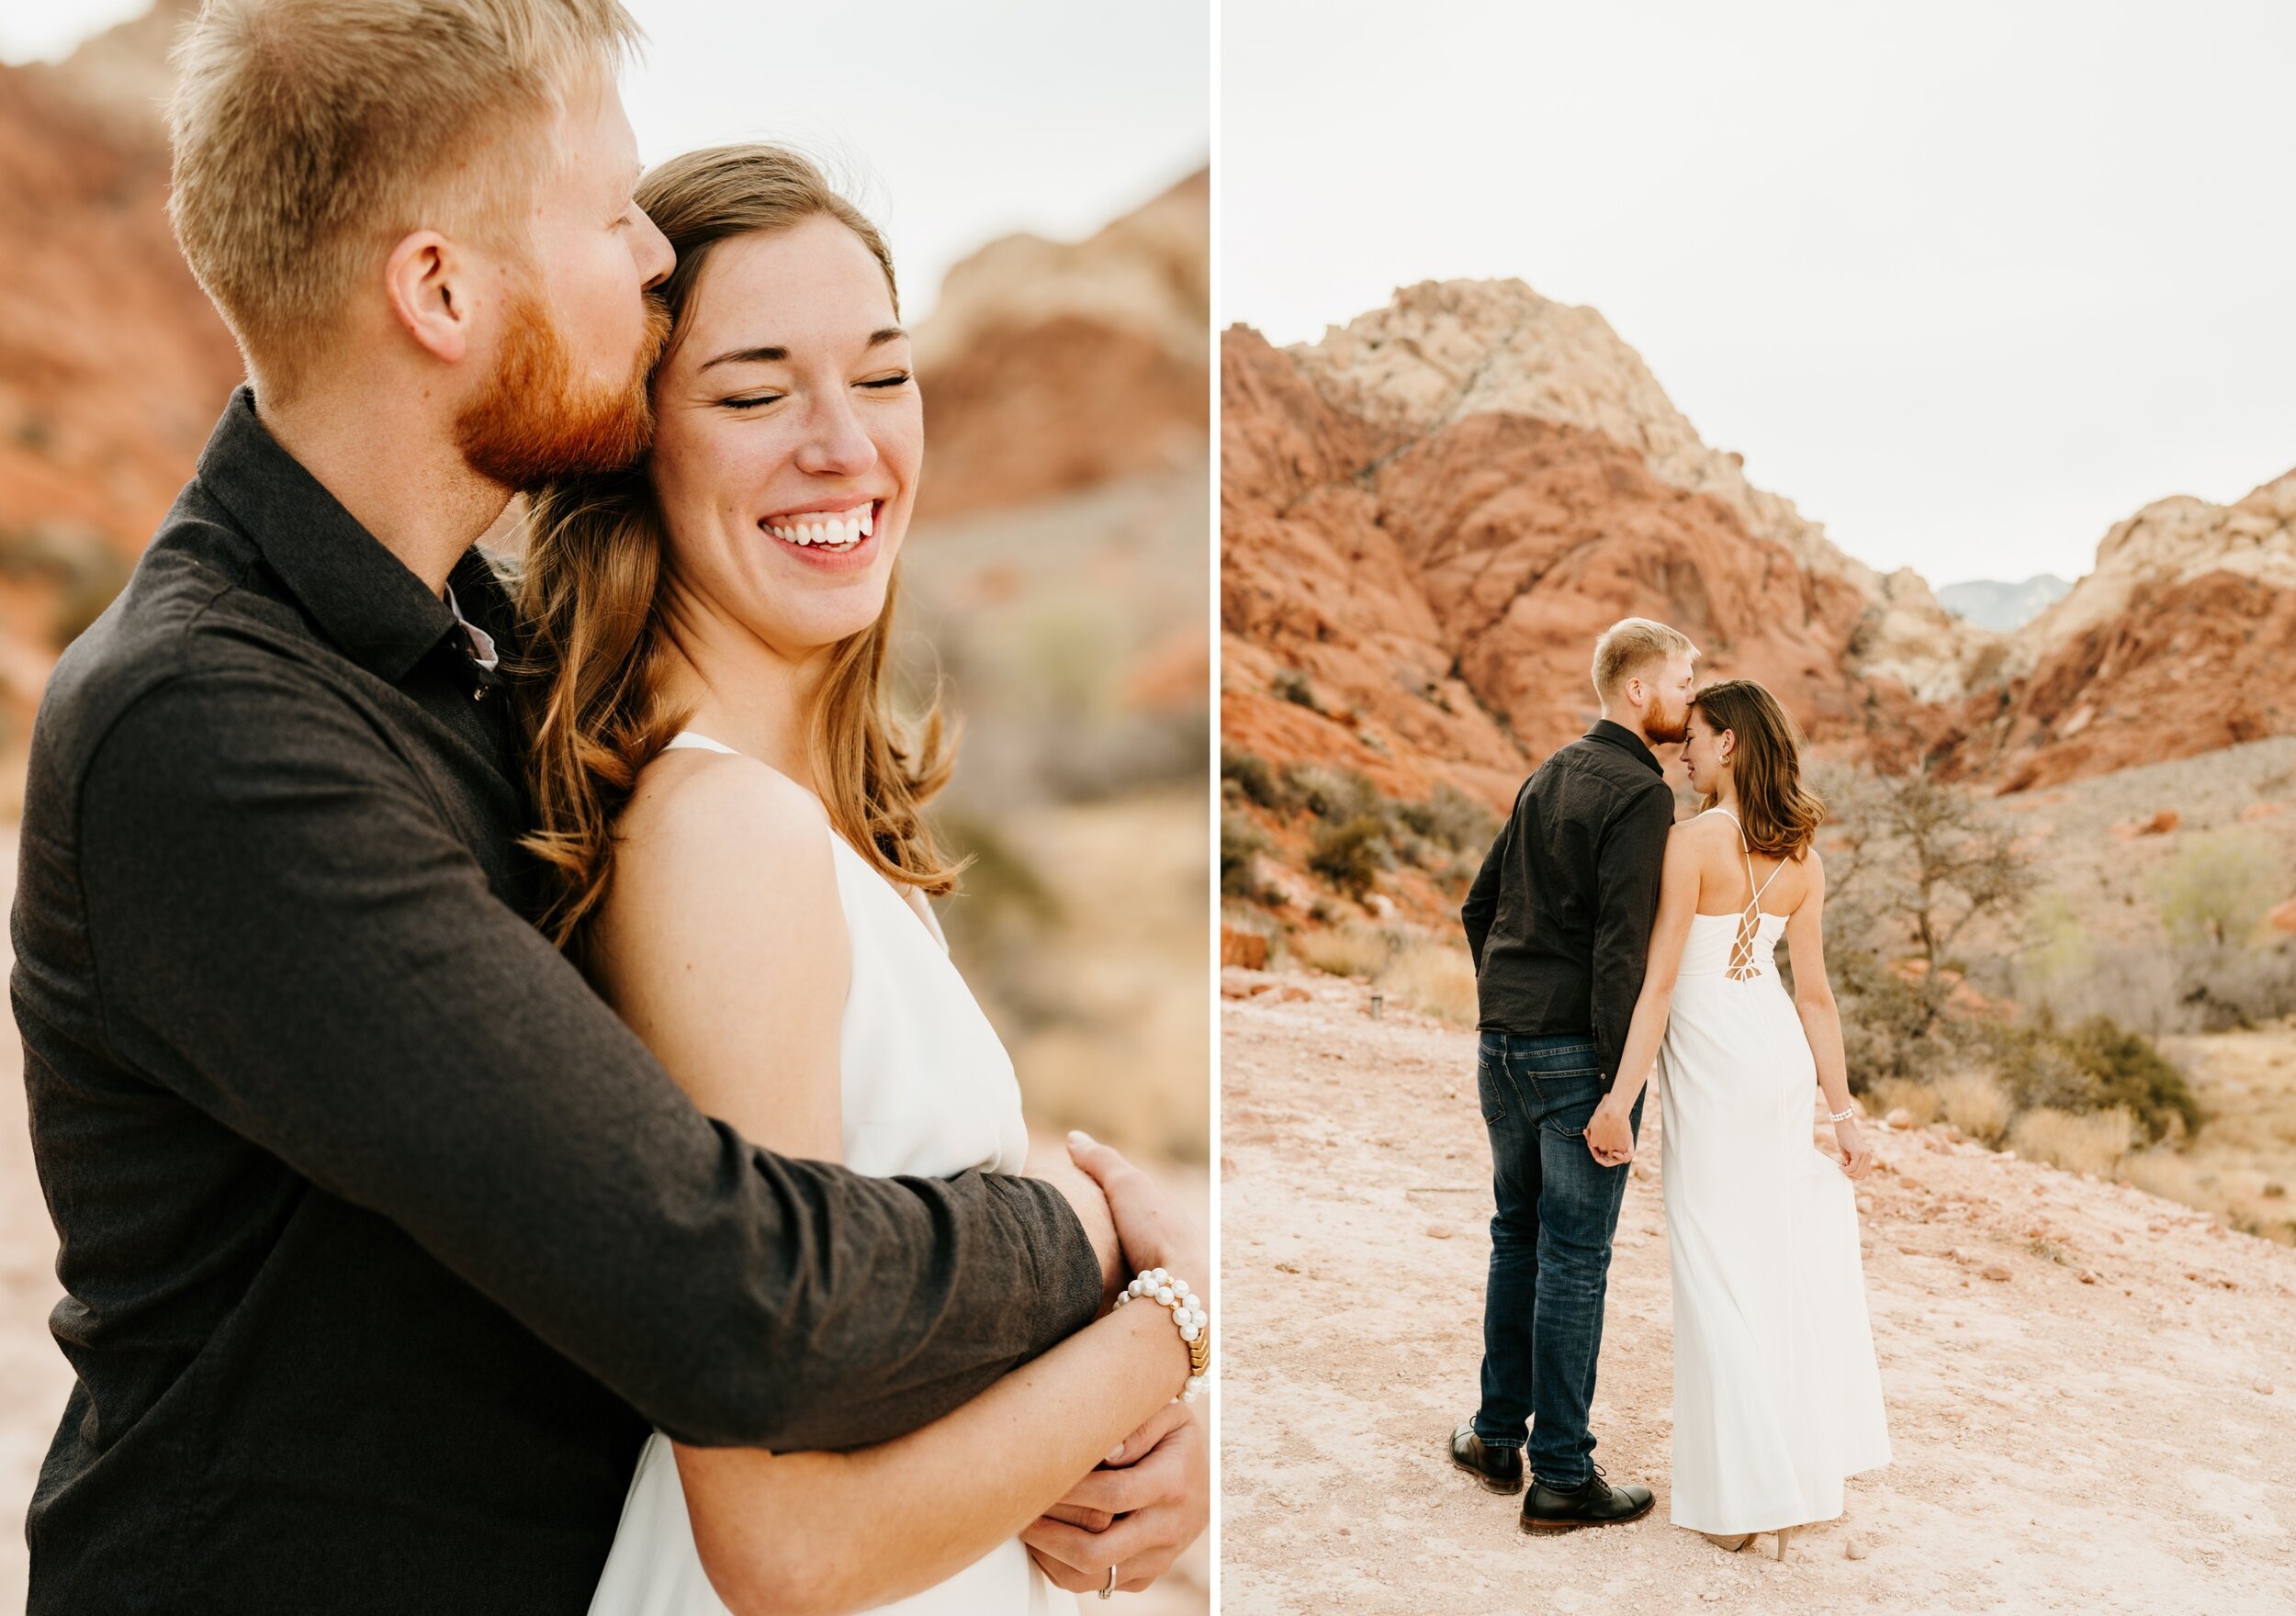 19_red-rock-canyon-engagement-session-nevada-41_red-rock-canyon-engagement-session-nevada-58.jpg